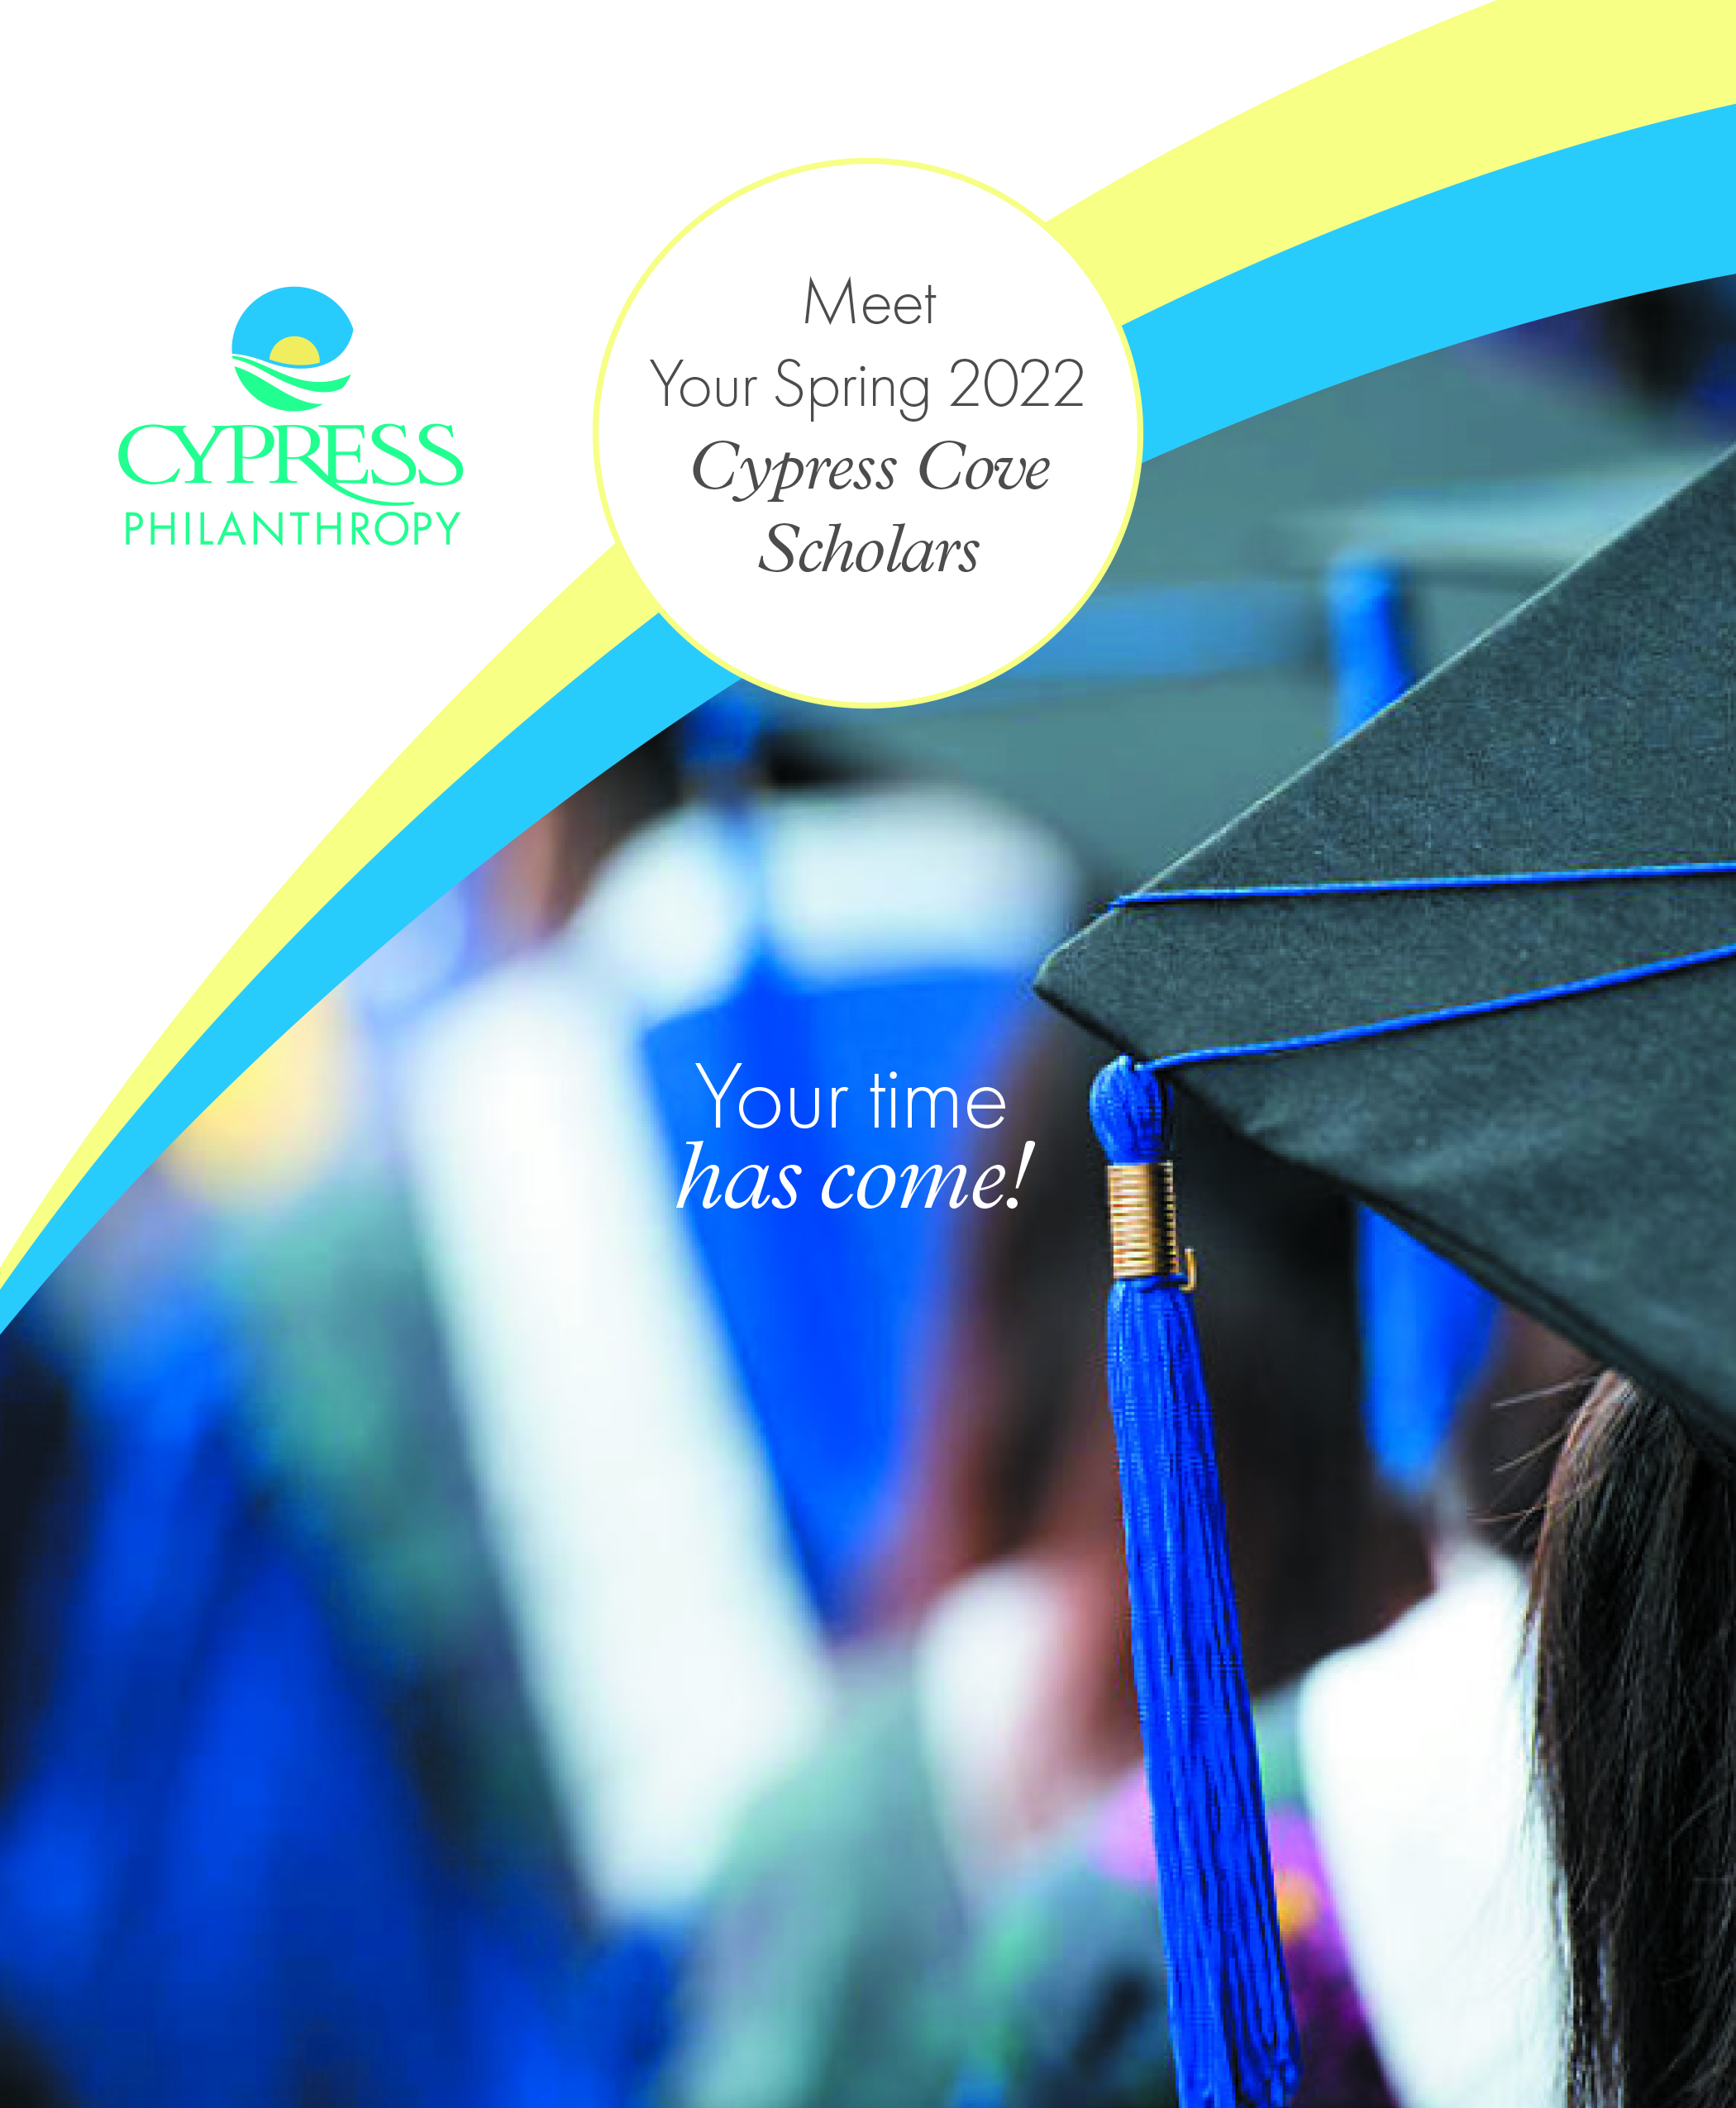 Cypress Cove Awards Scholarships to Employees